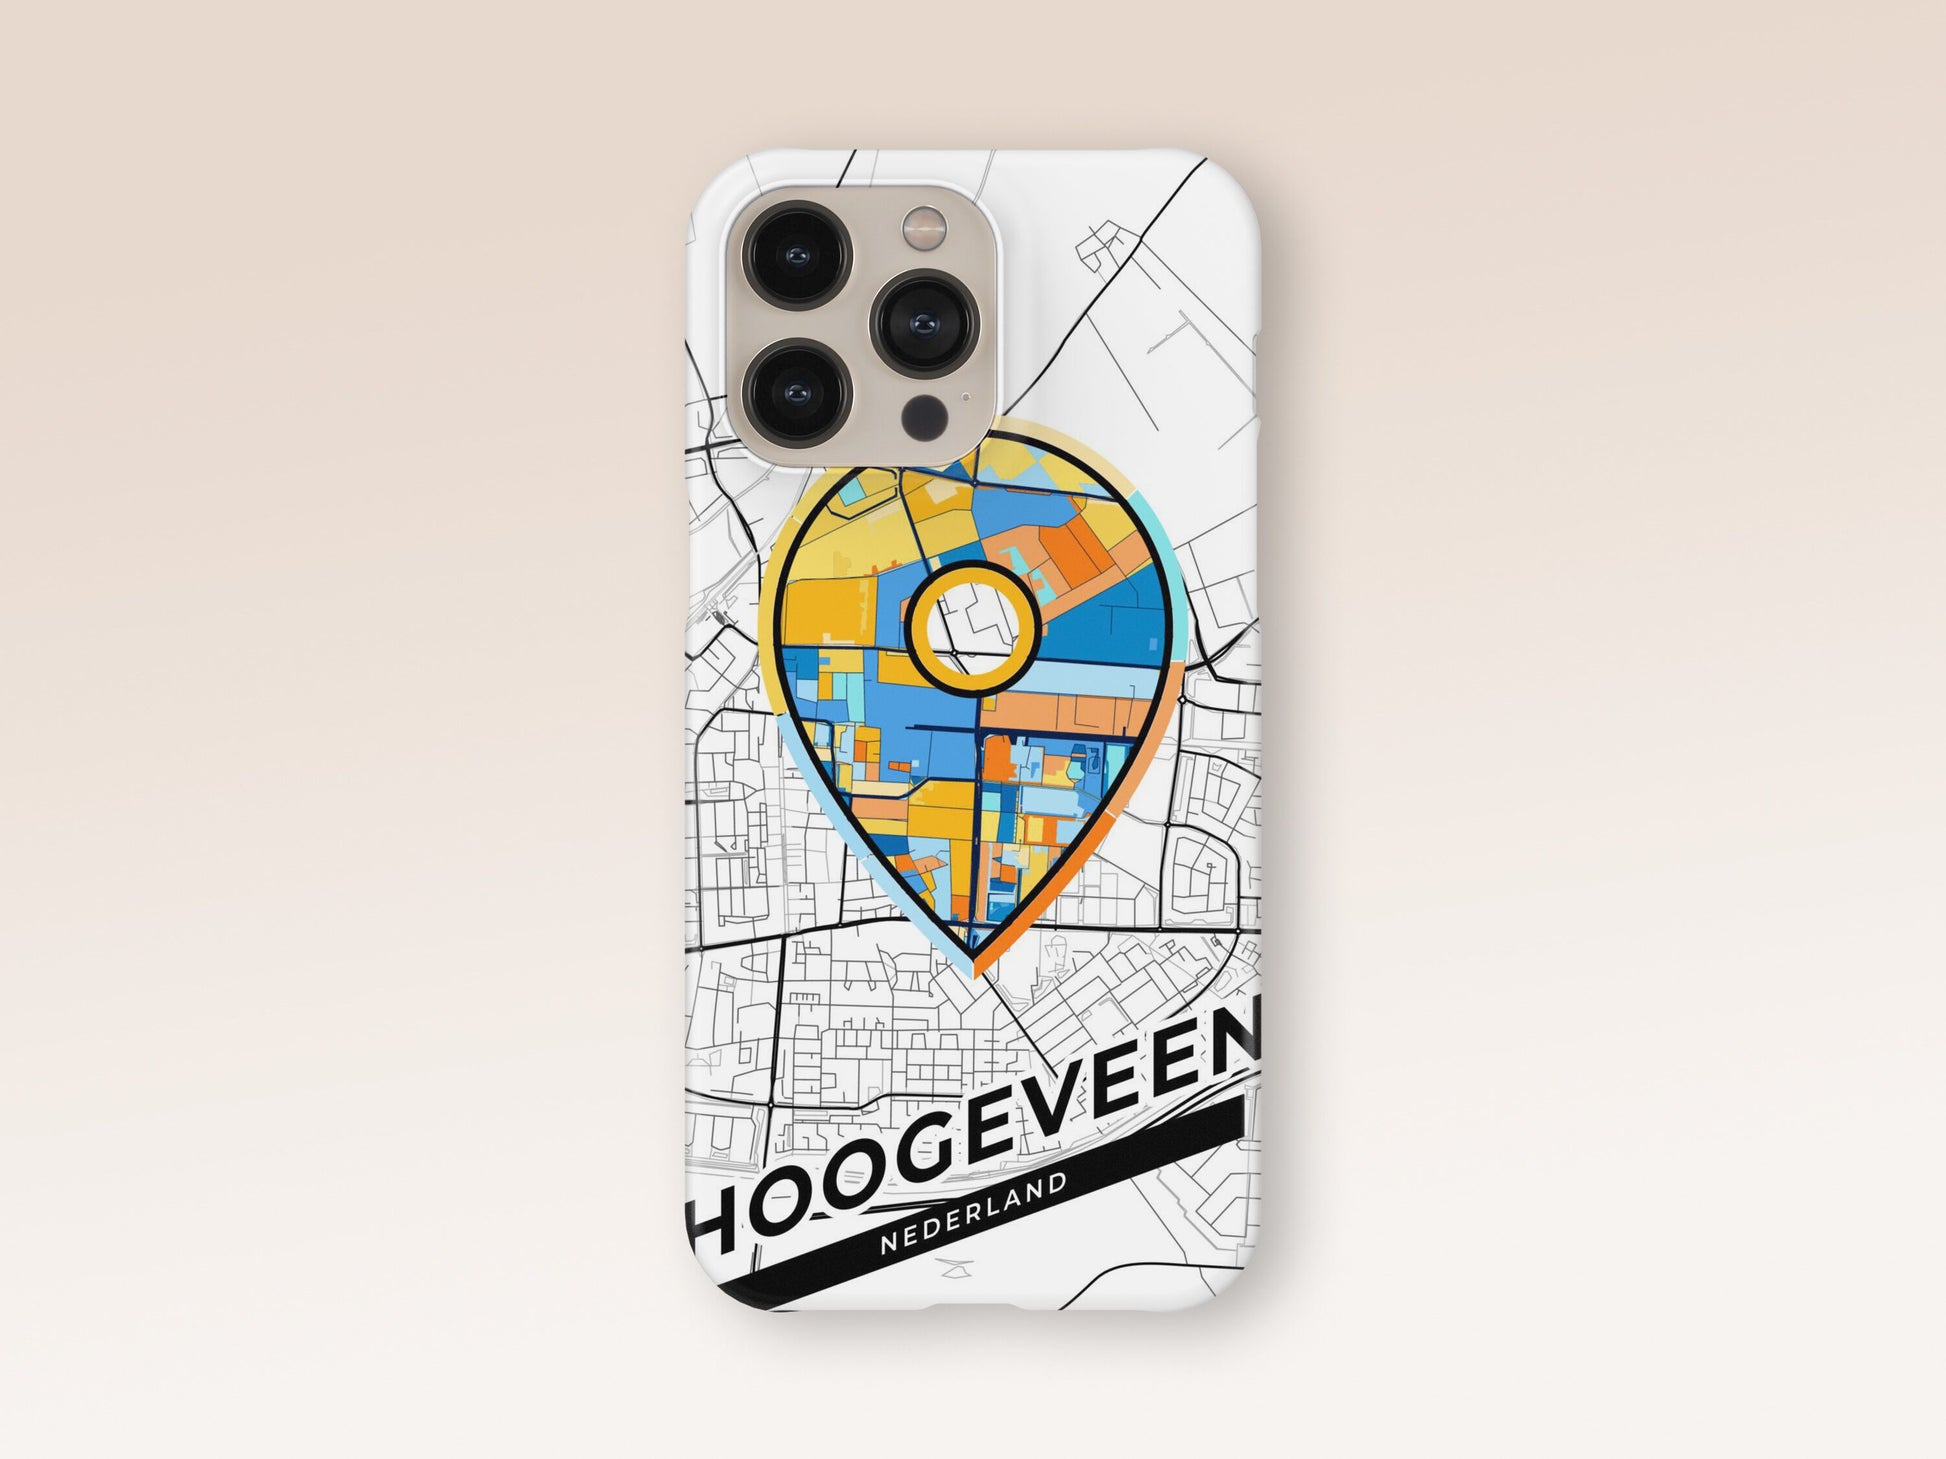 Hoogeveen Netherlands slim phone case with colorful icon. Birthday, wedding or housewarming gift. Couple match cases. 1